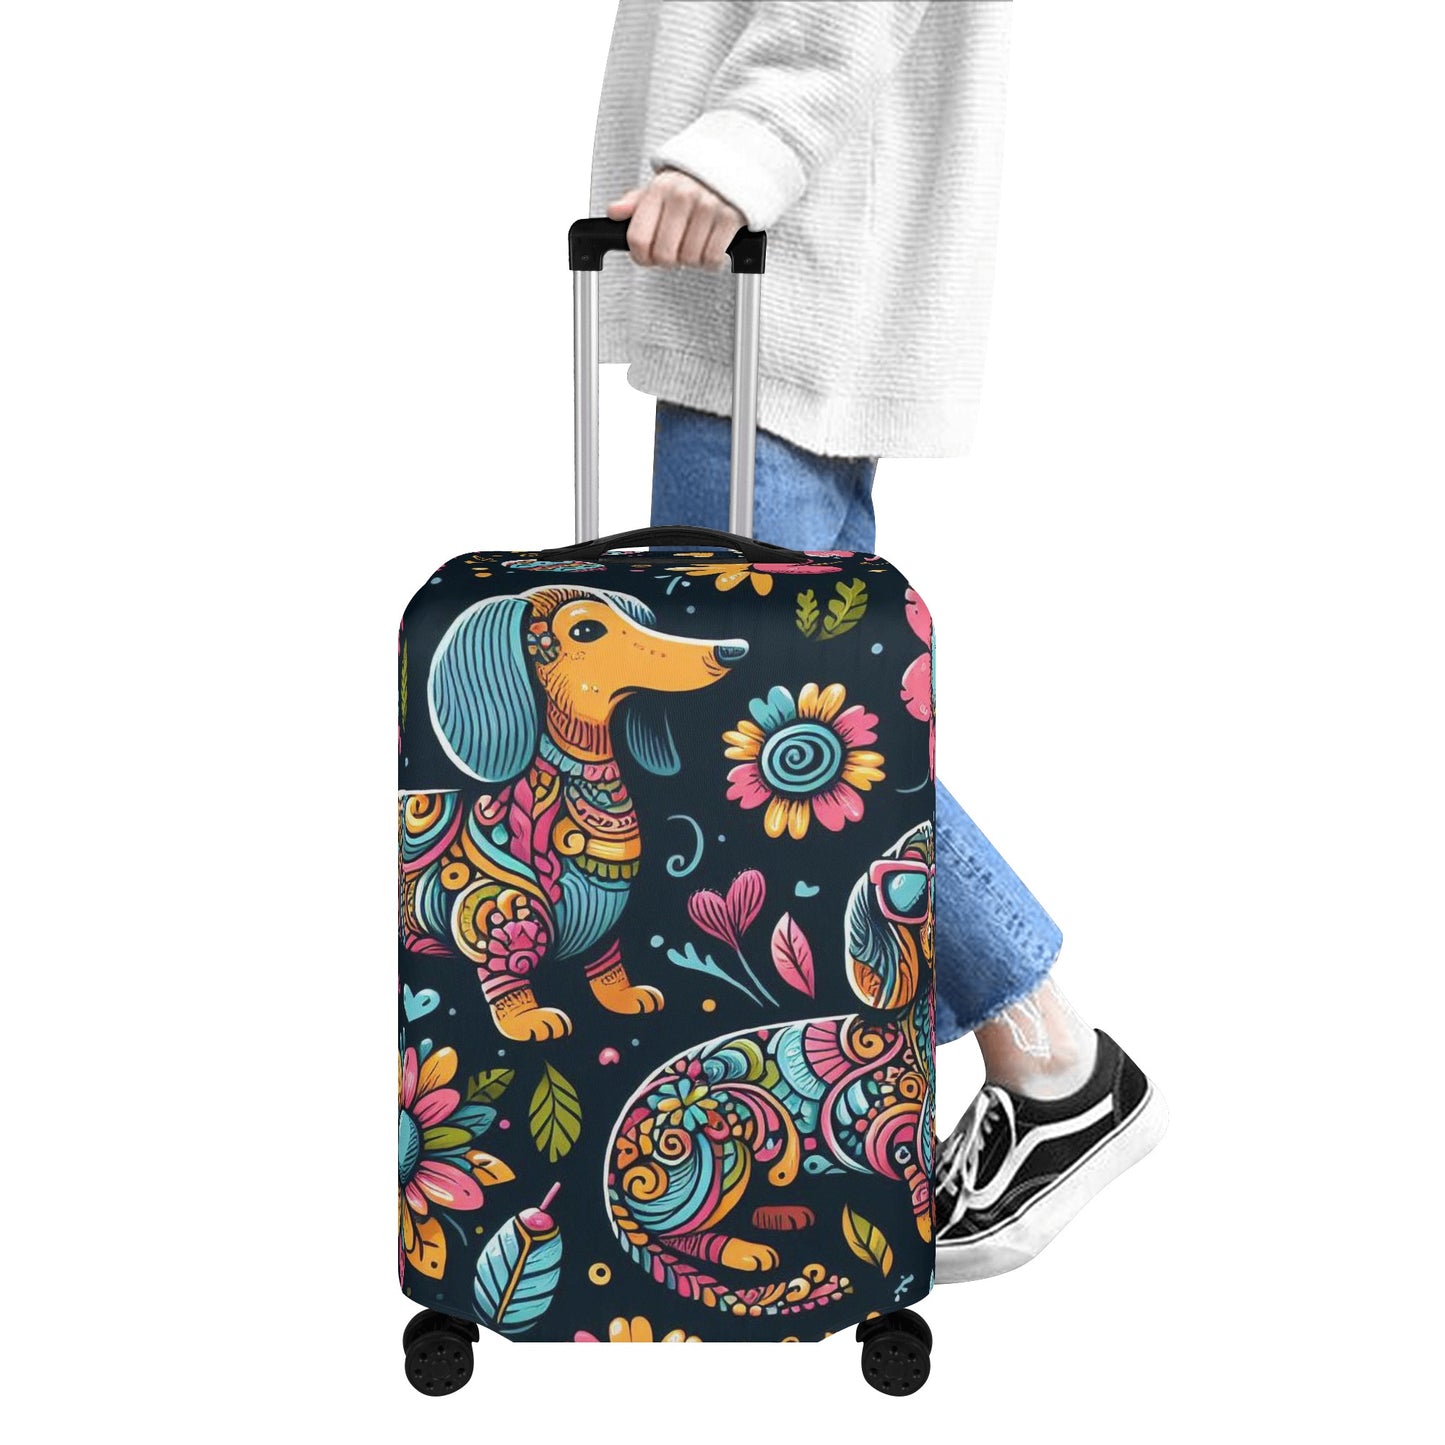 Rudy - Luggage Cover